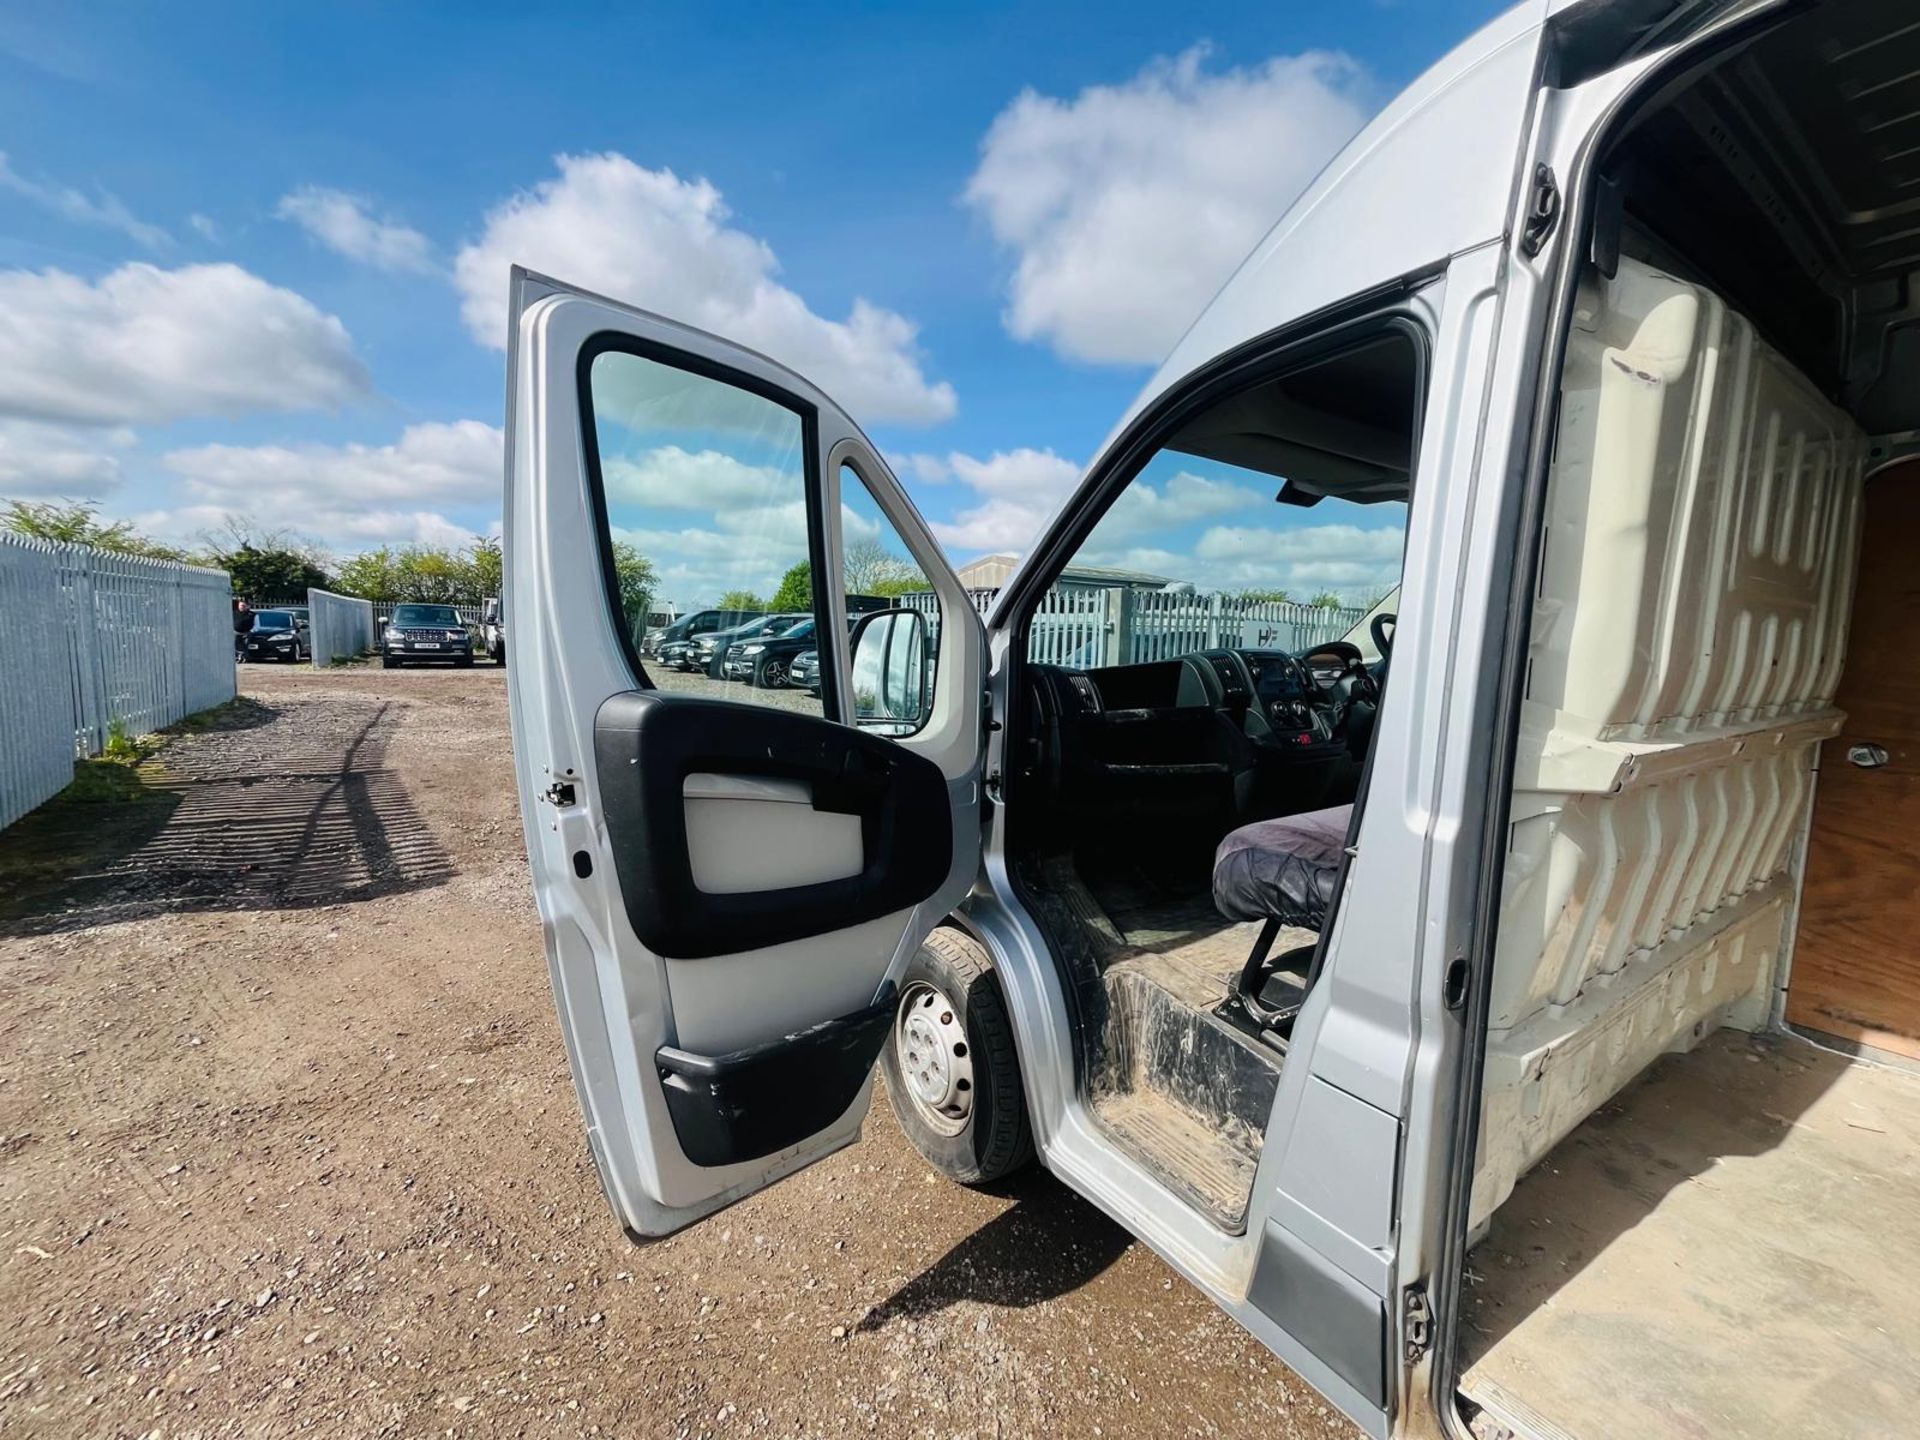 ** ON SALE ** Citroen Relay 2.2 HDI 130 Enterprise L2 H2 2.2 2015 '15 Reg' -A/C- Plylined- Bluetooth - Image 23 of 29